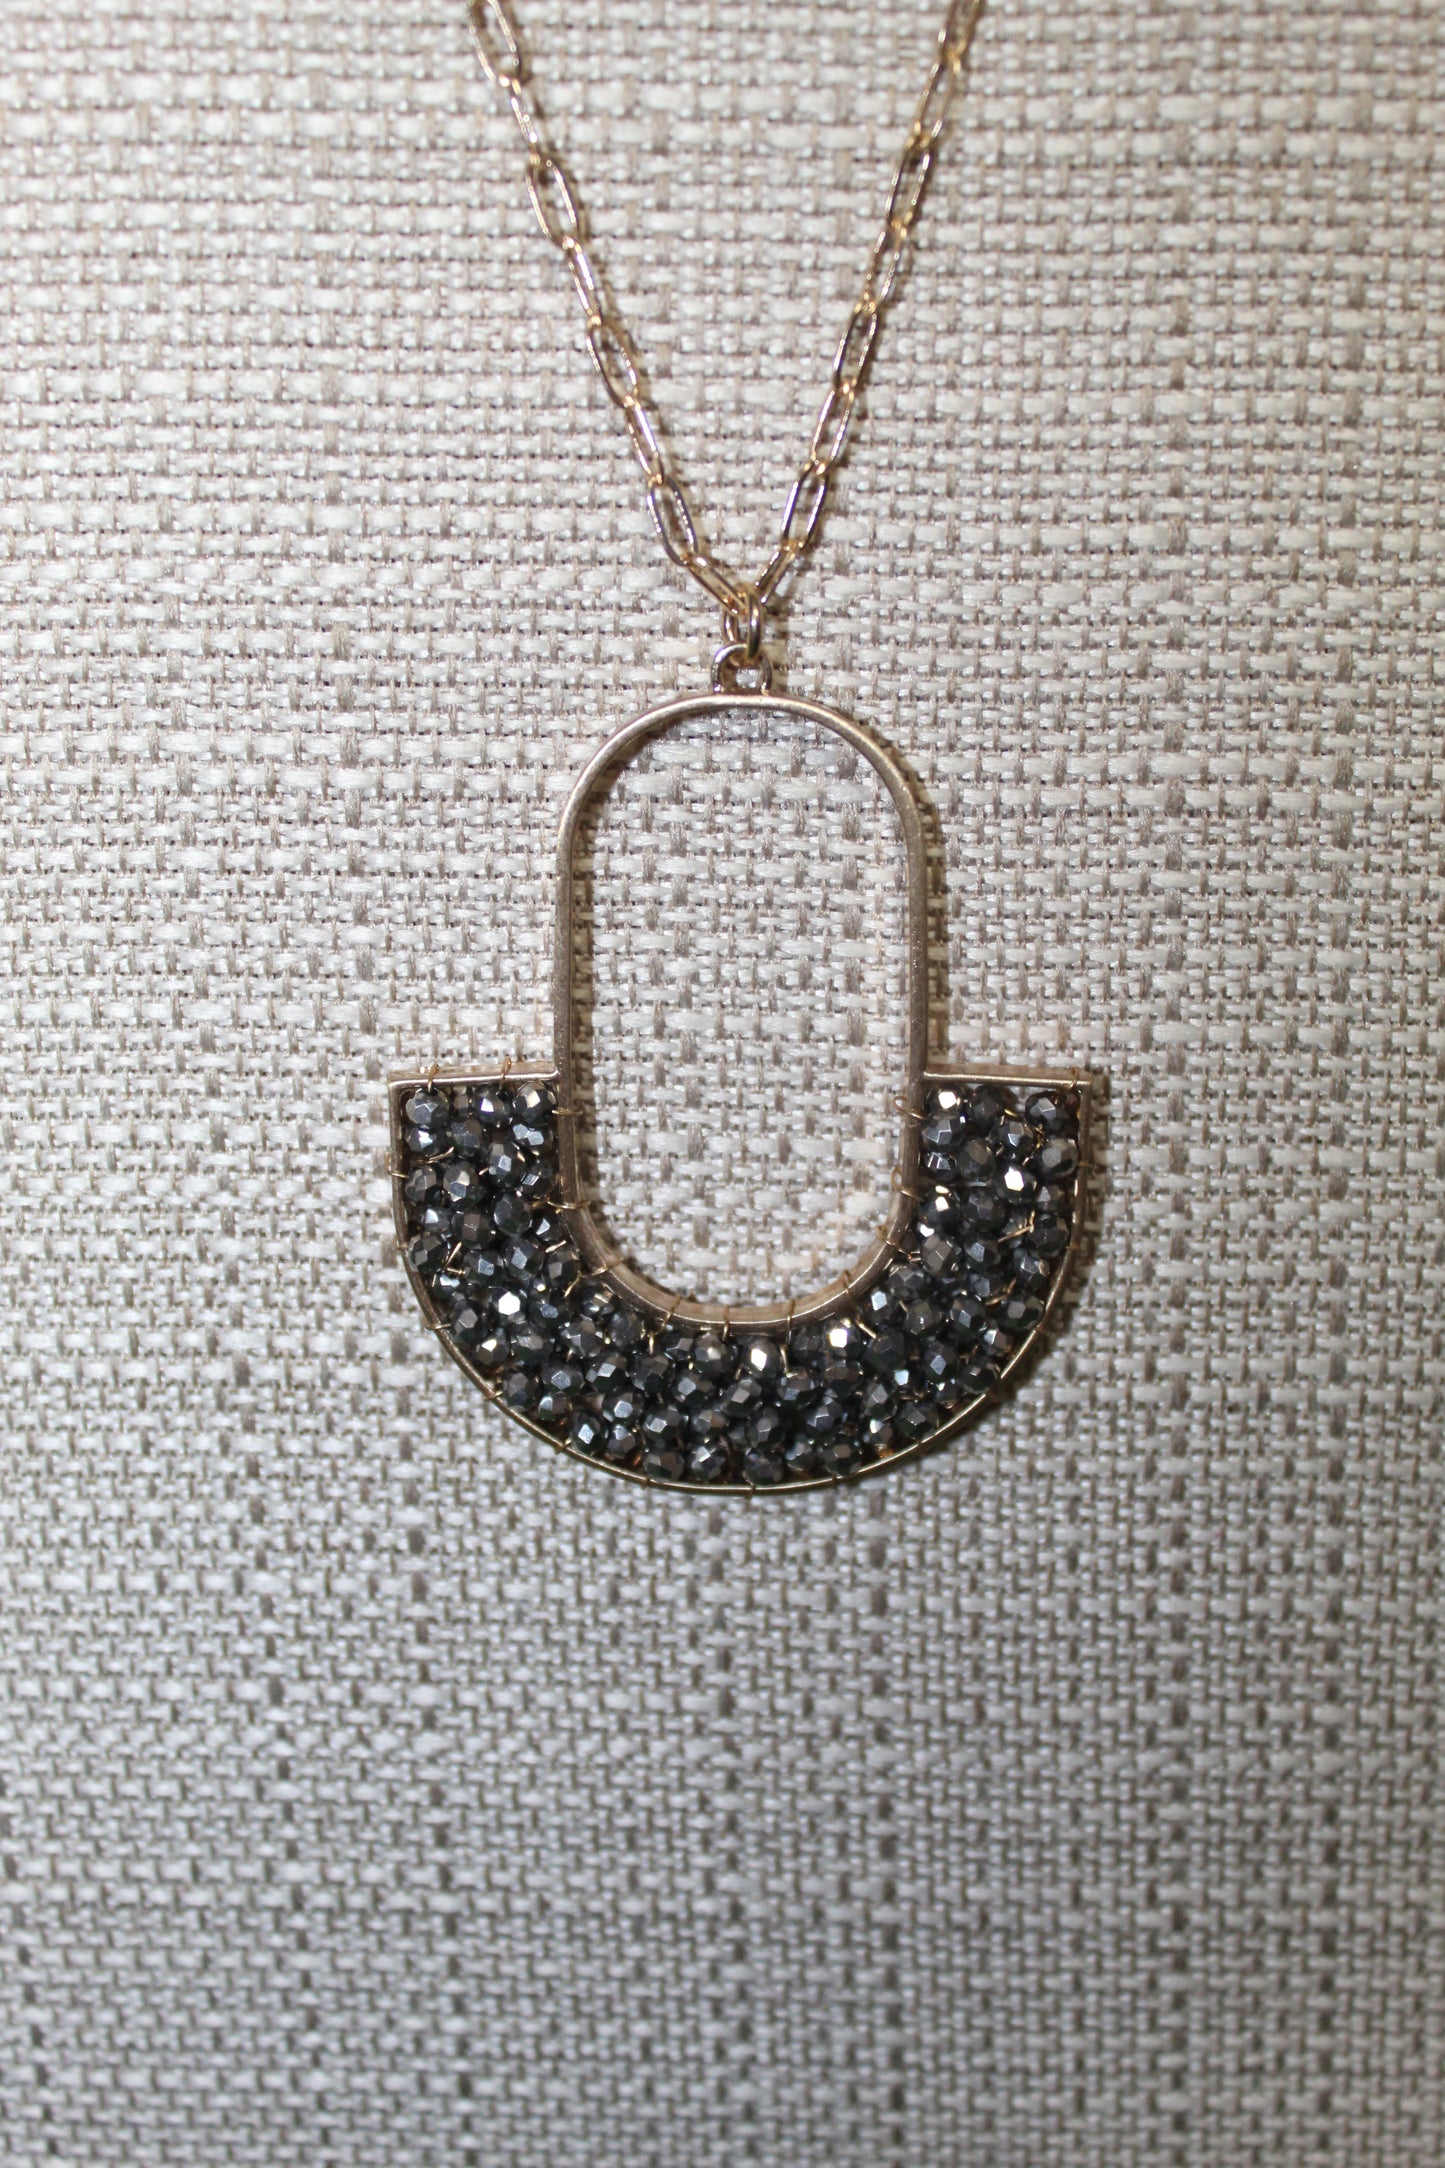 Gold Oval Pendant with Half Moon Necklace